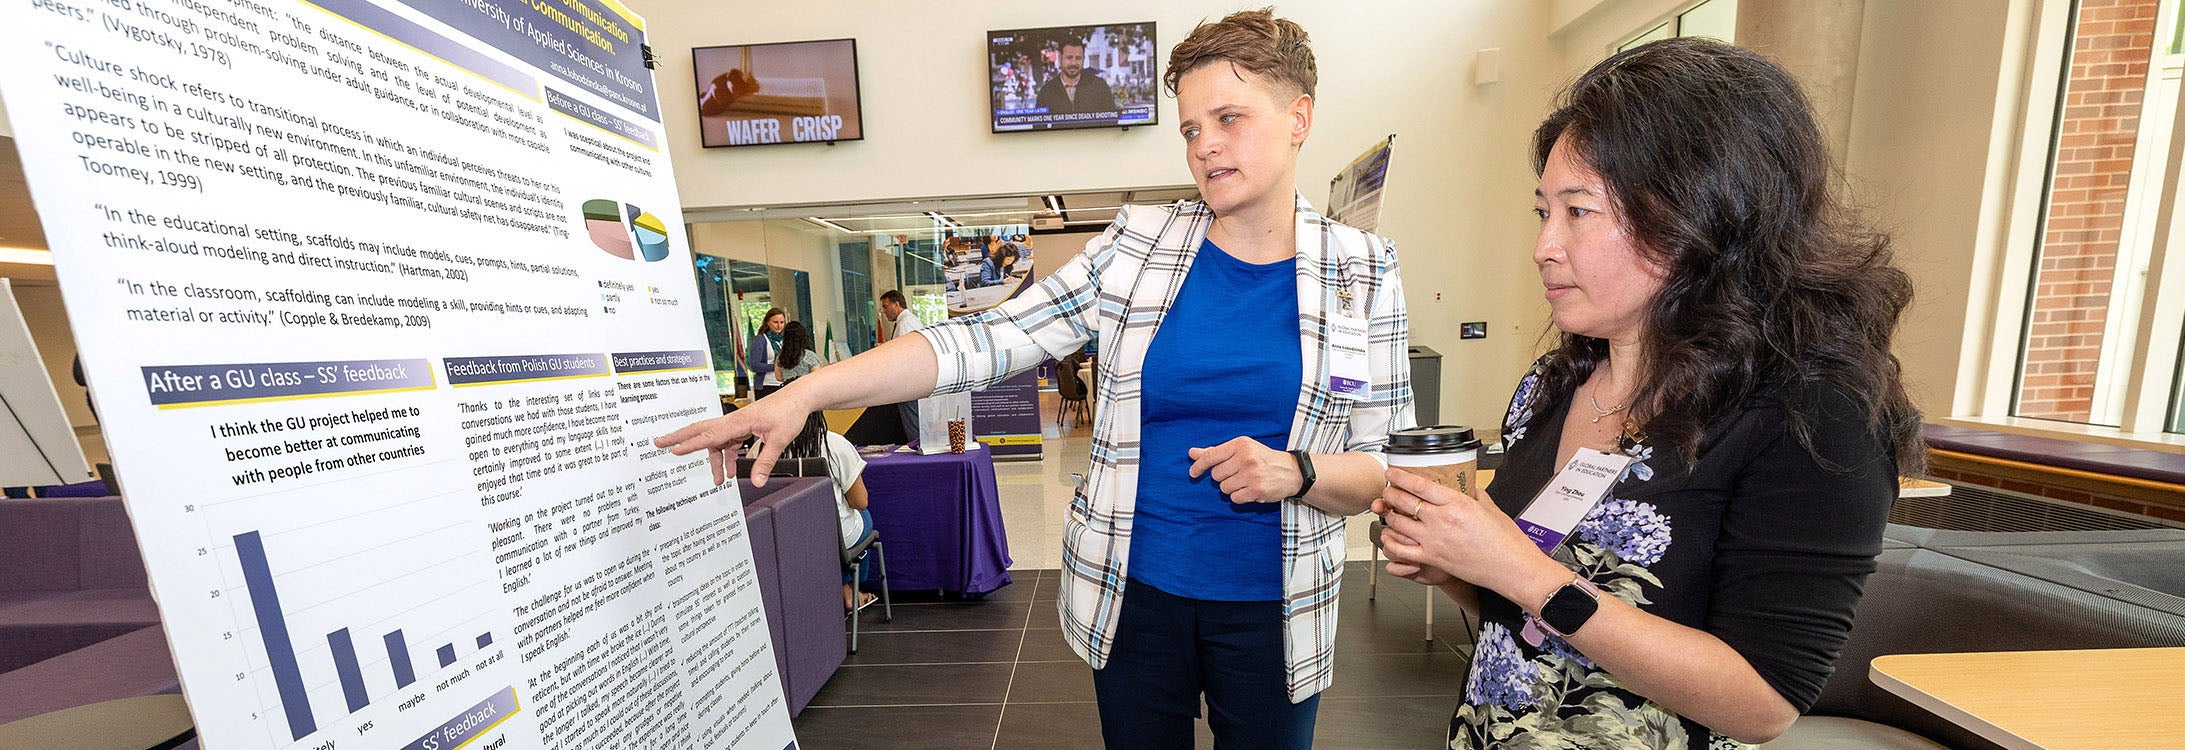 Anna Lobozinska, left, discusses her research with Ying Zhou during the 16th annual Global Partners in Education Conference inside East Carolina University's Main Campus Student Center. (ECU photo by Rhett Butler)